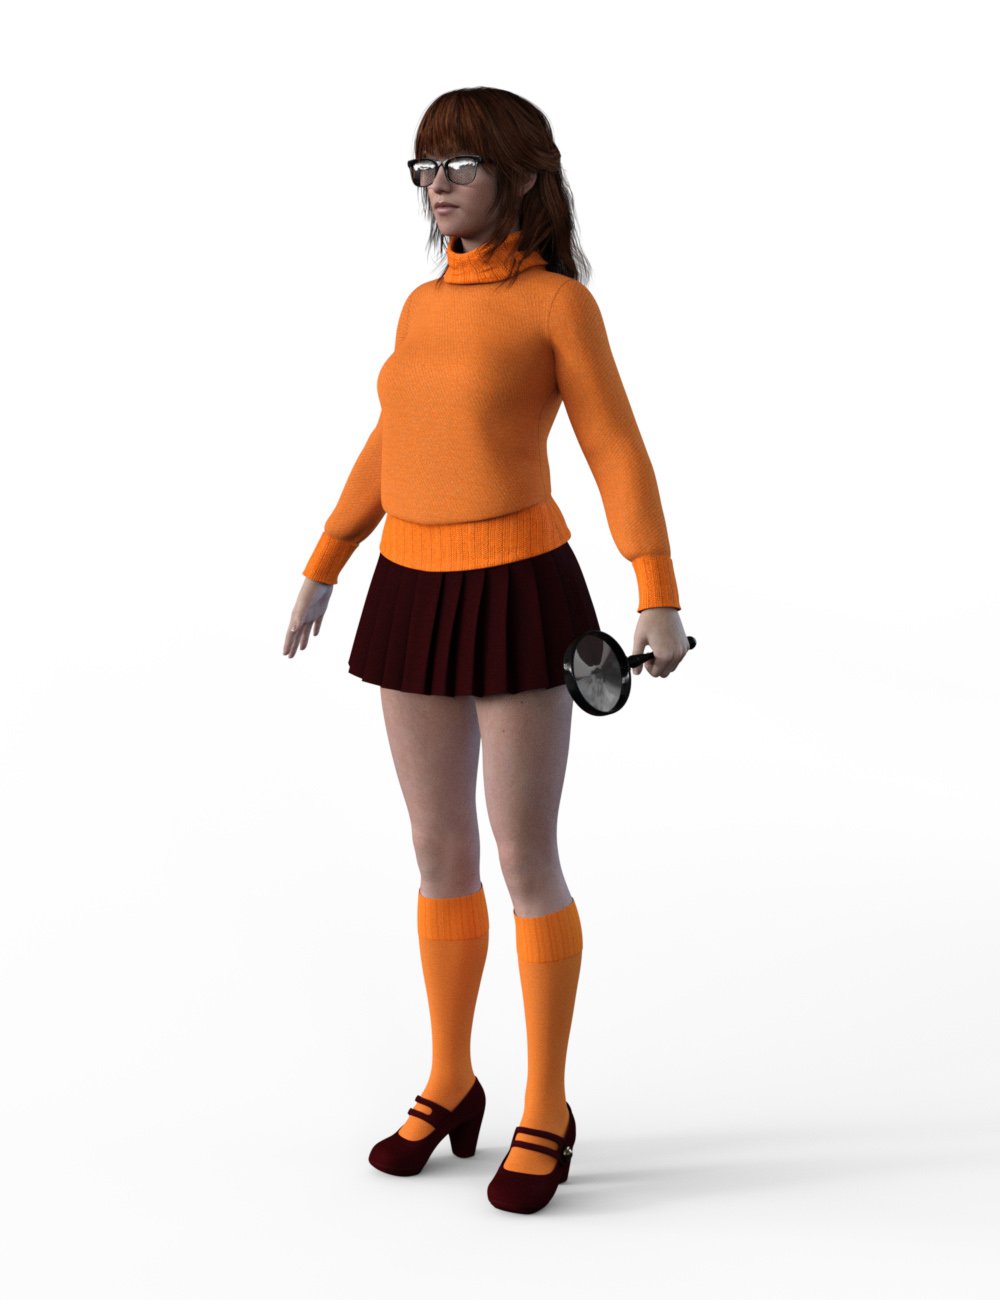 FBX- Base Female Mystery Solver Outfit by: Paleo, 3D Models by Daz 3D